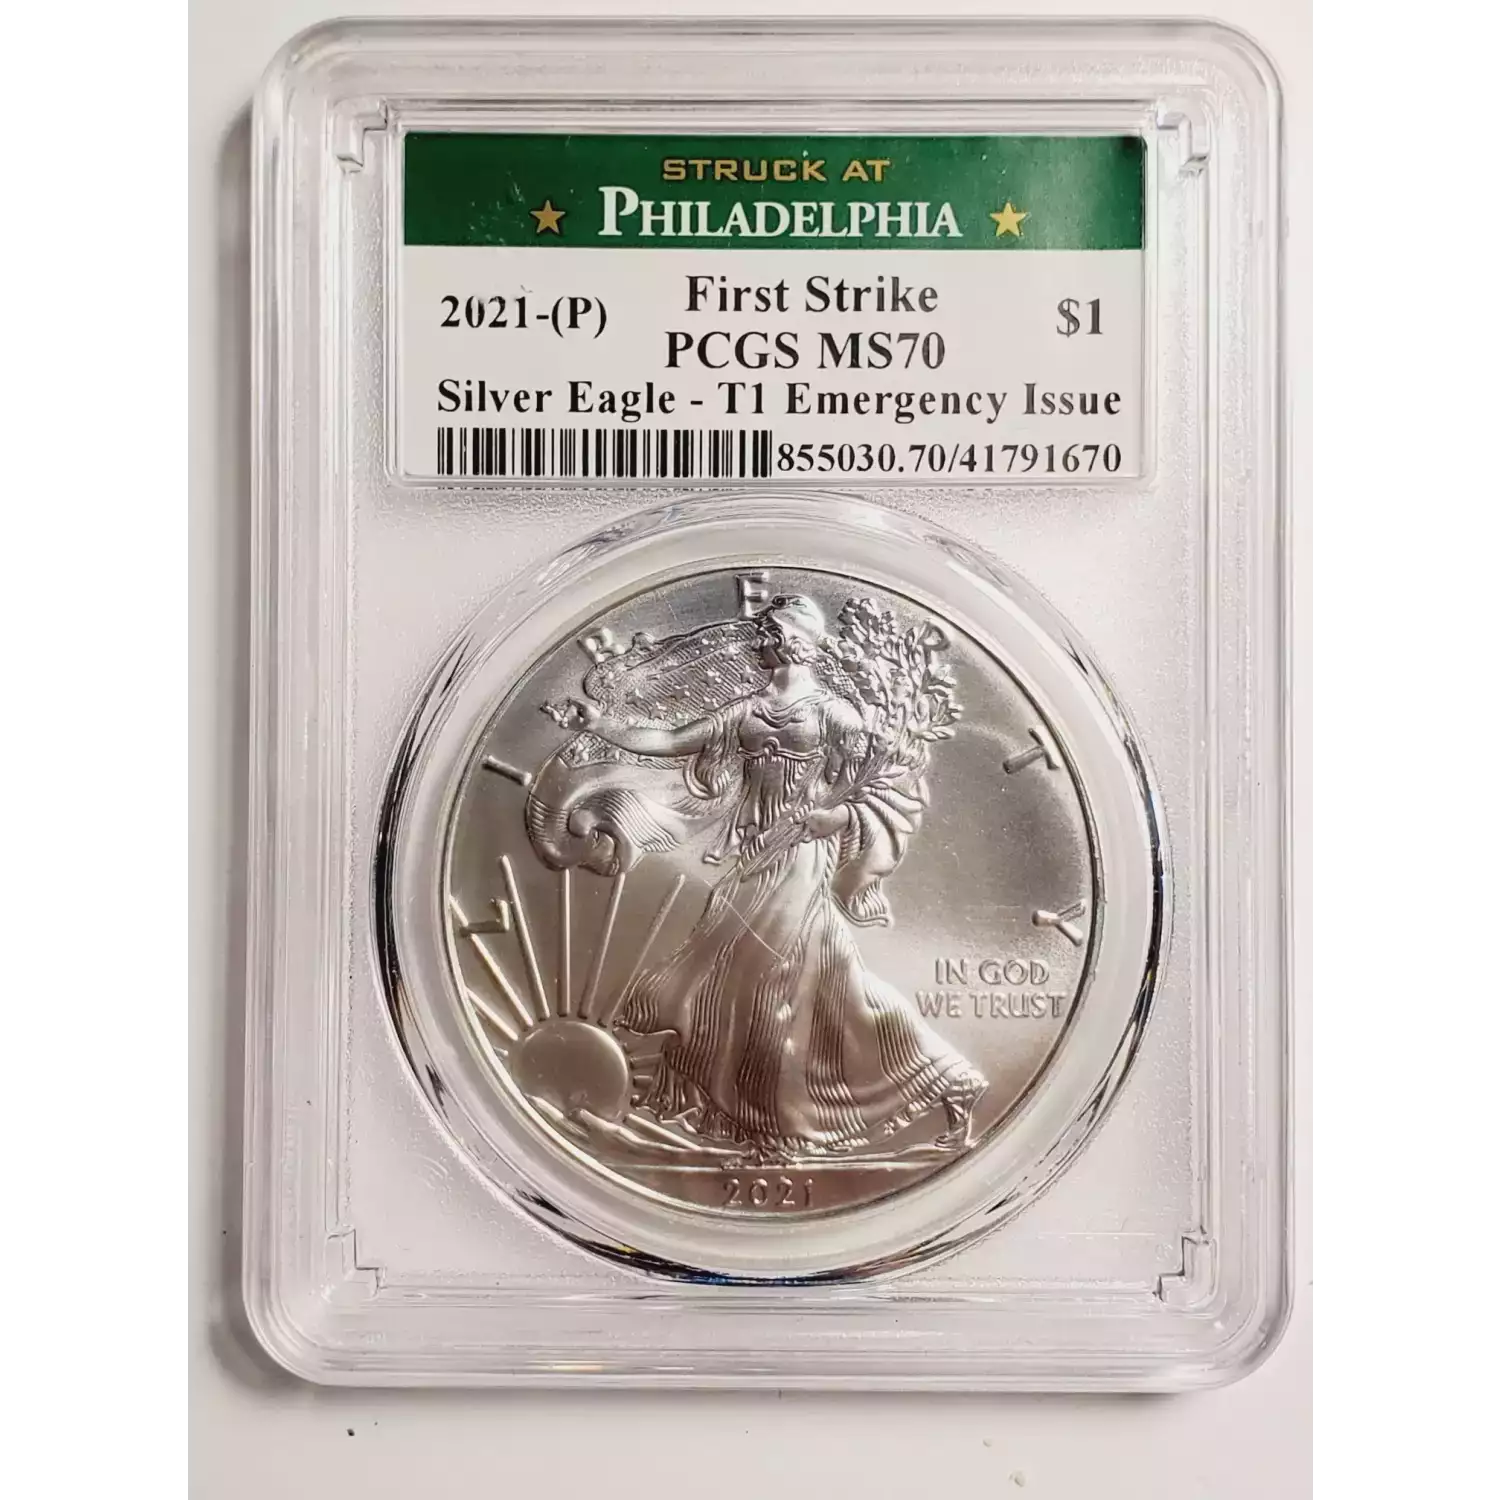 2021-(P) $1 Silver Eagle - T1 Emergency Issue Struck at Philadelphia First Strike